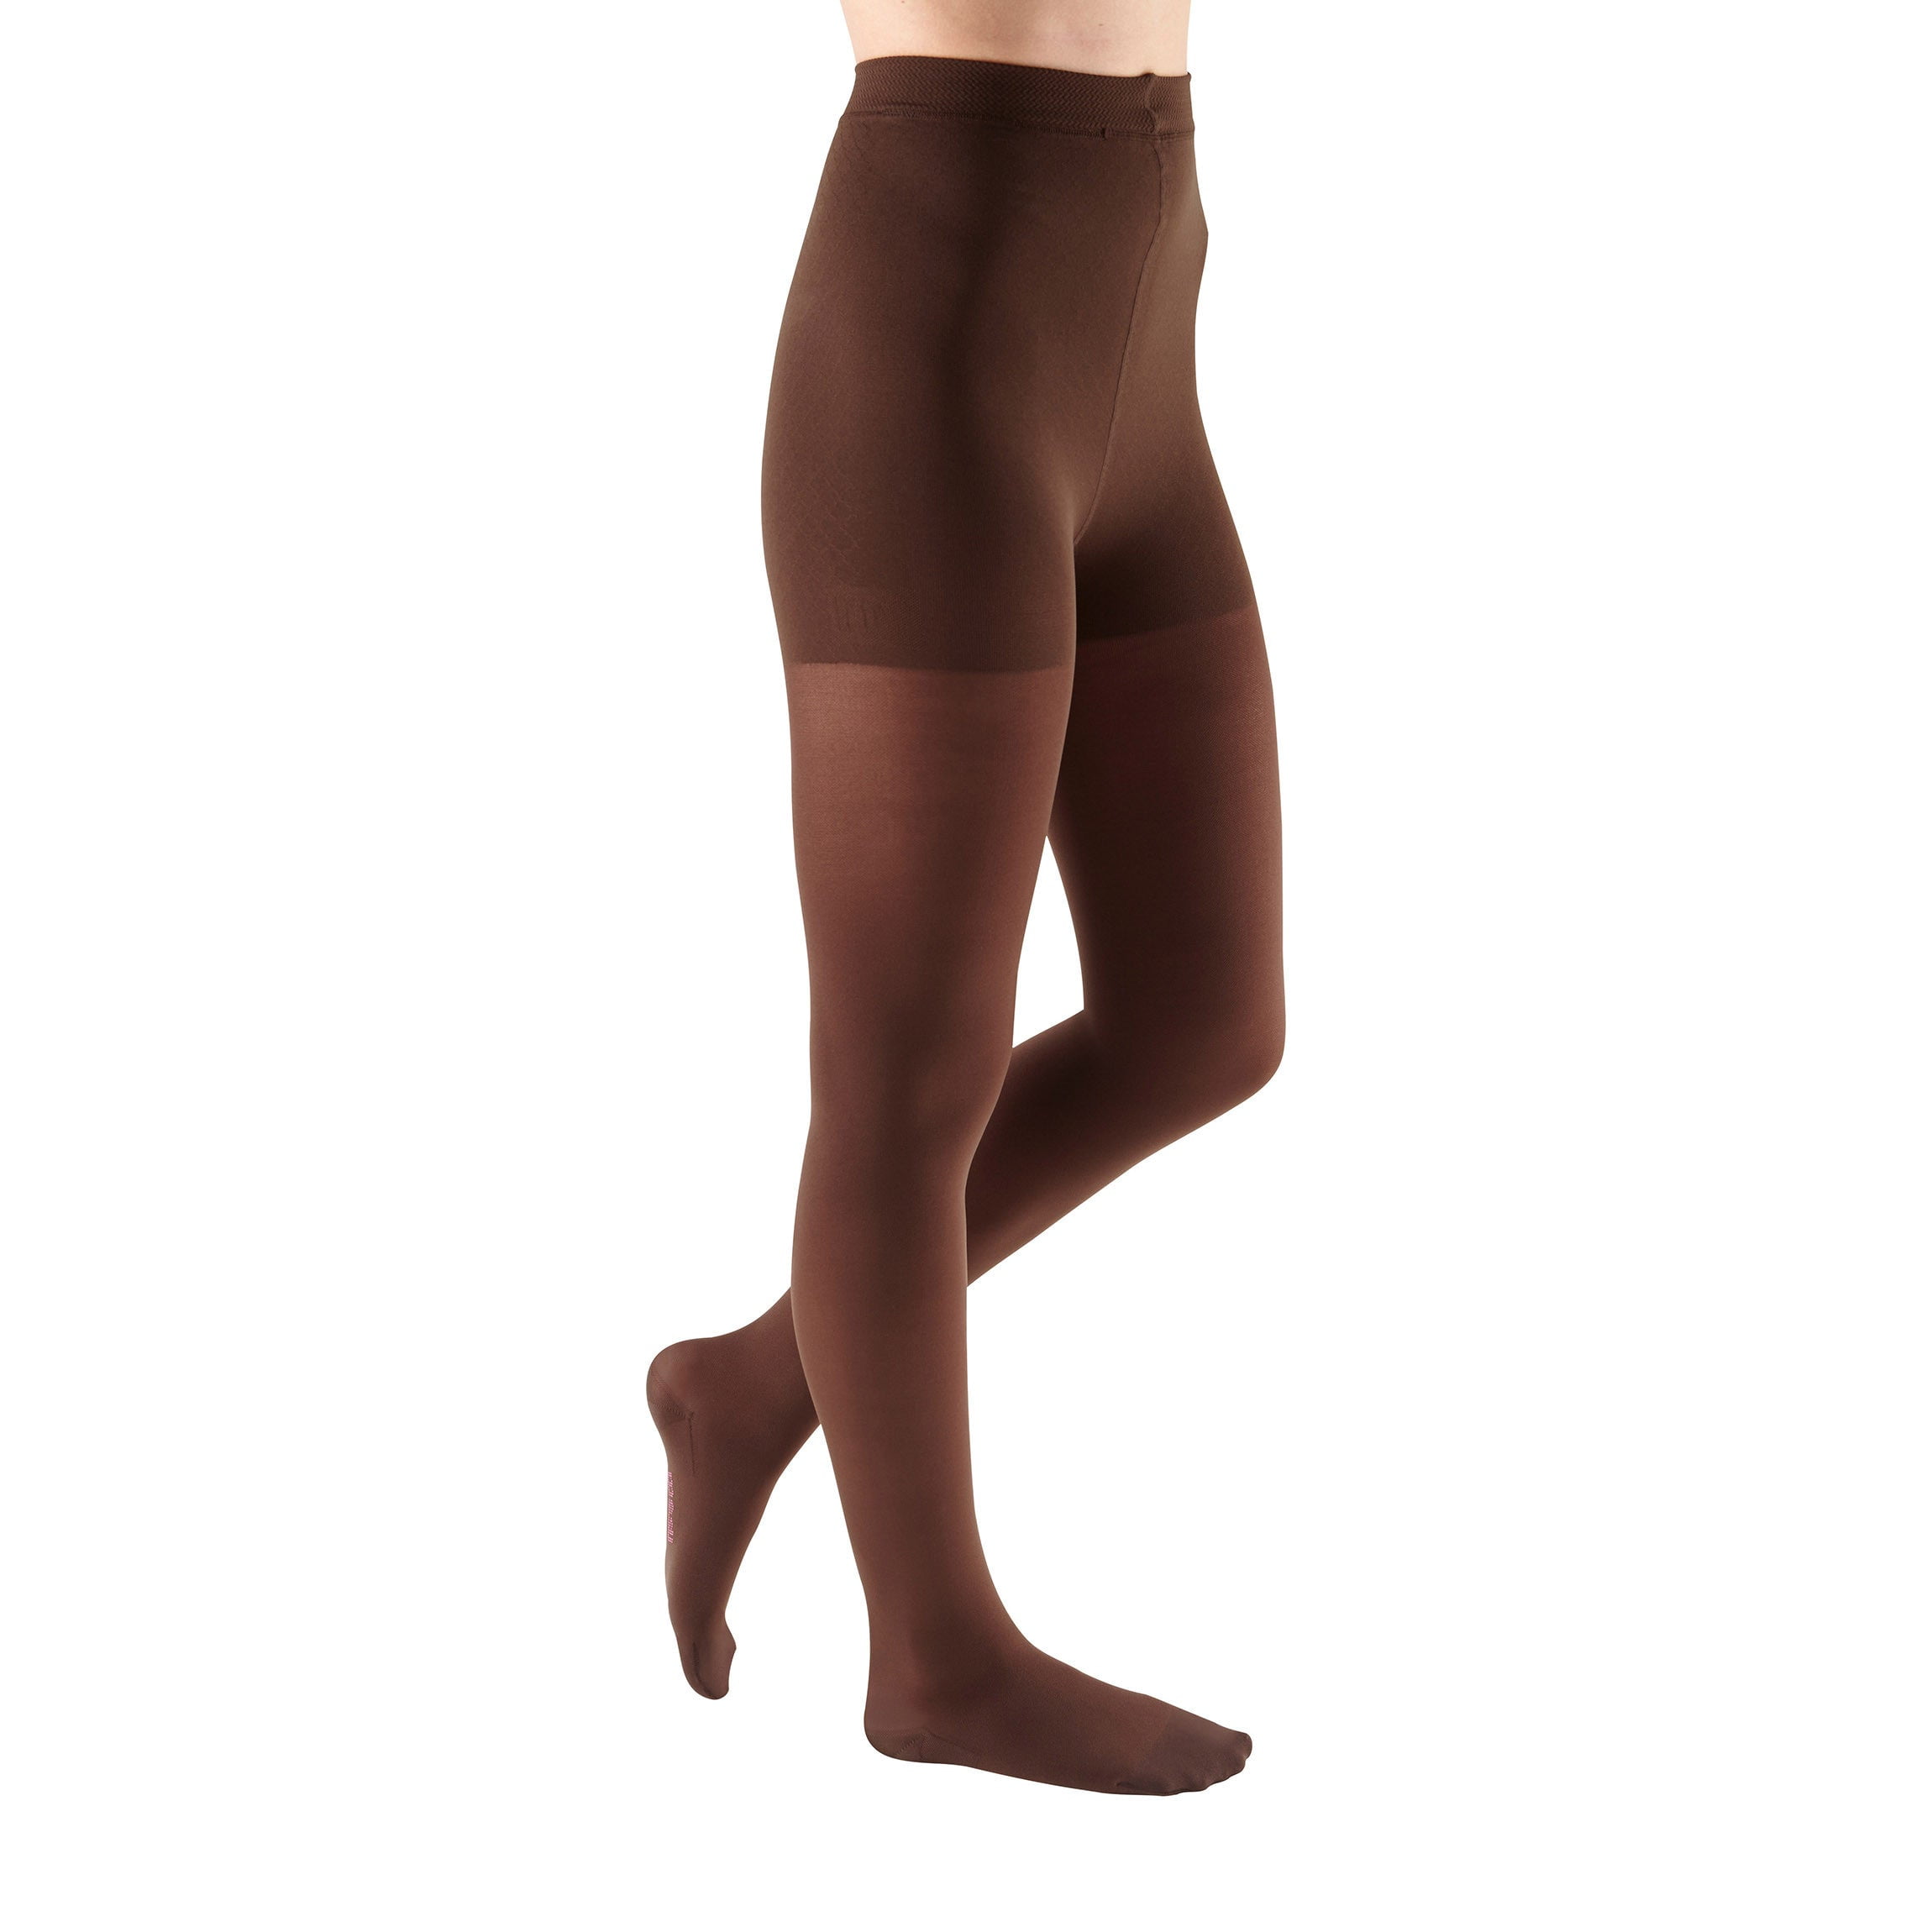 Made in USA - Compression Tights Women Circulation 8-15 mmHg - Nude, X-Large